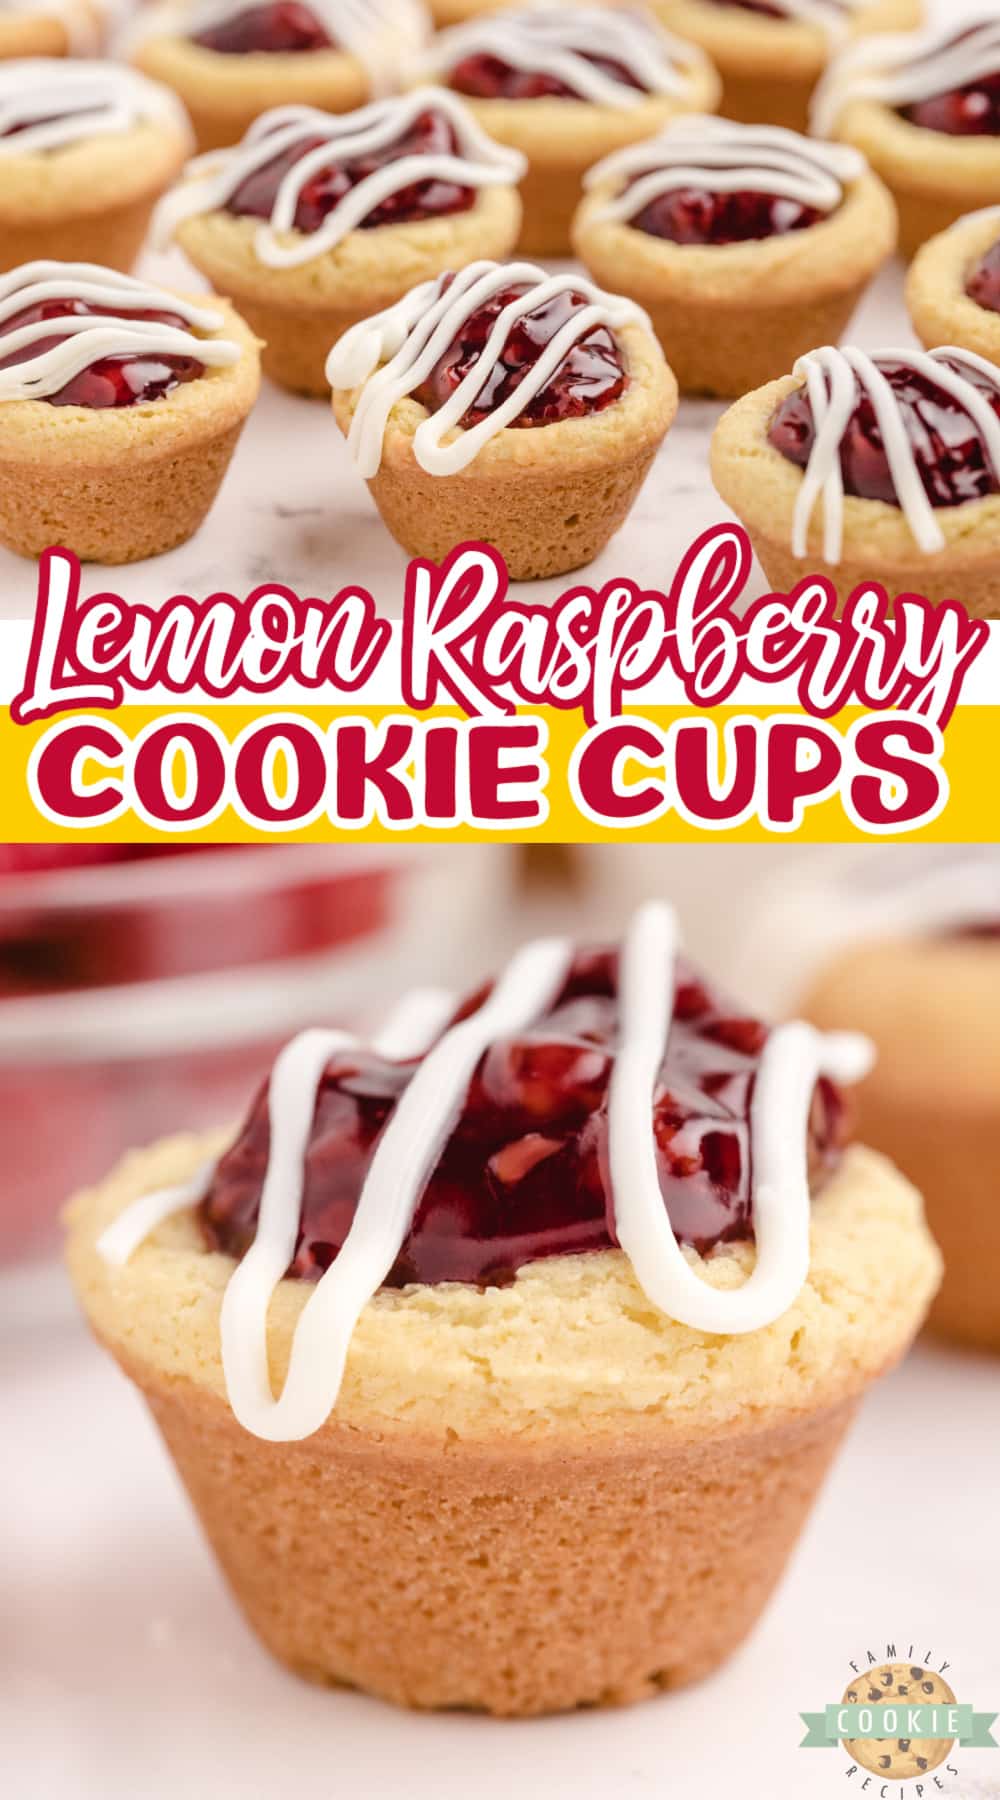 Lemon Raspberry Cookie Cups are made with a simple lemon cookie recipe and raspberry pie filling. Drizzle a little white chocolate on top for a bite sized cookie cup recipe that is impressive and delicious!